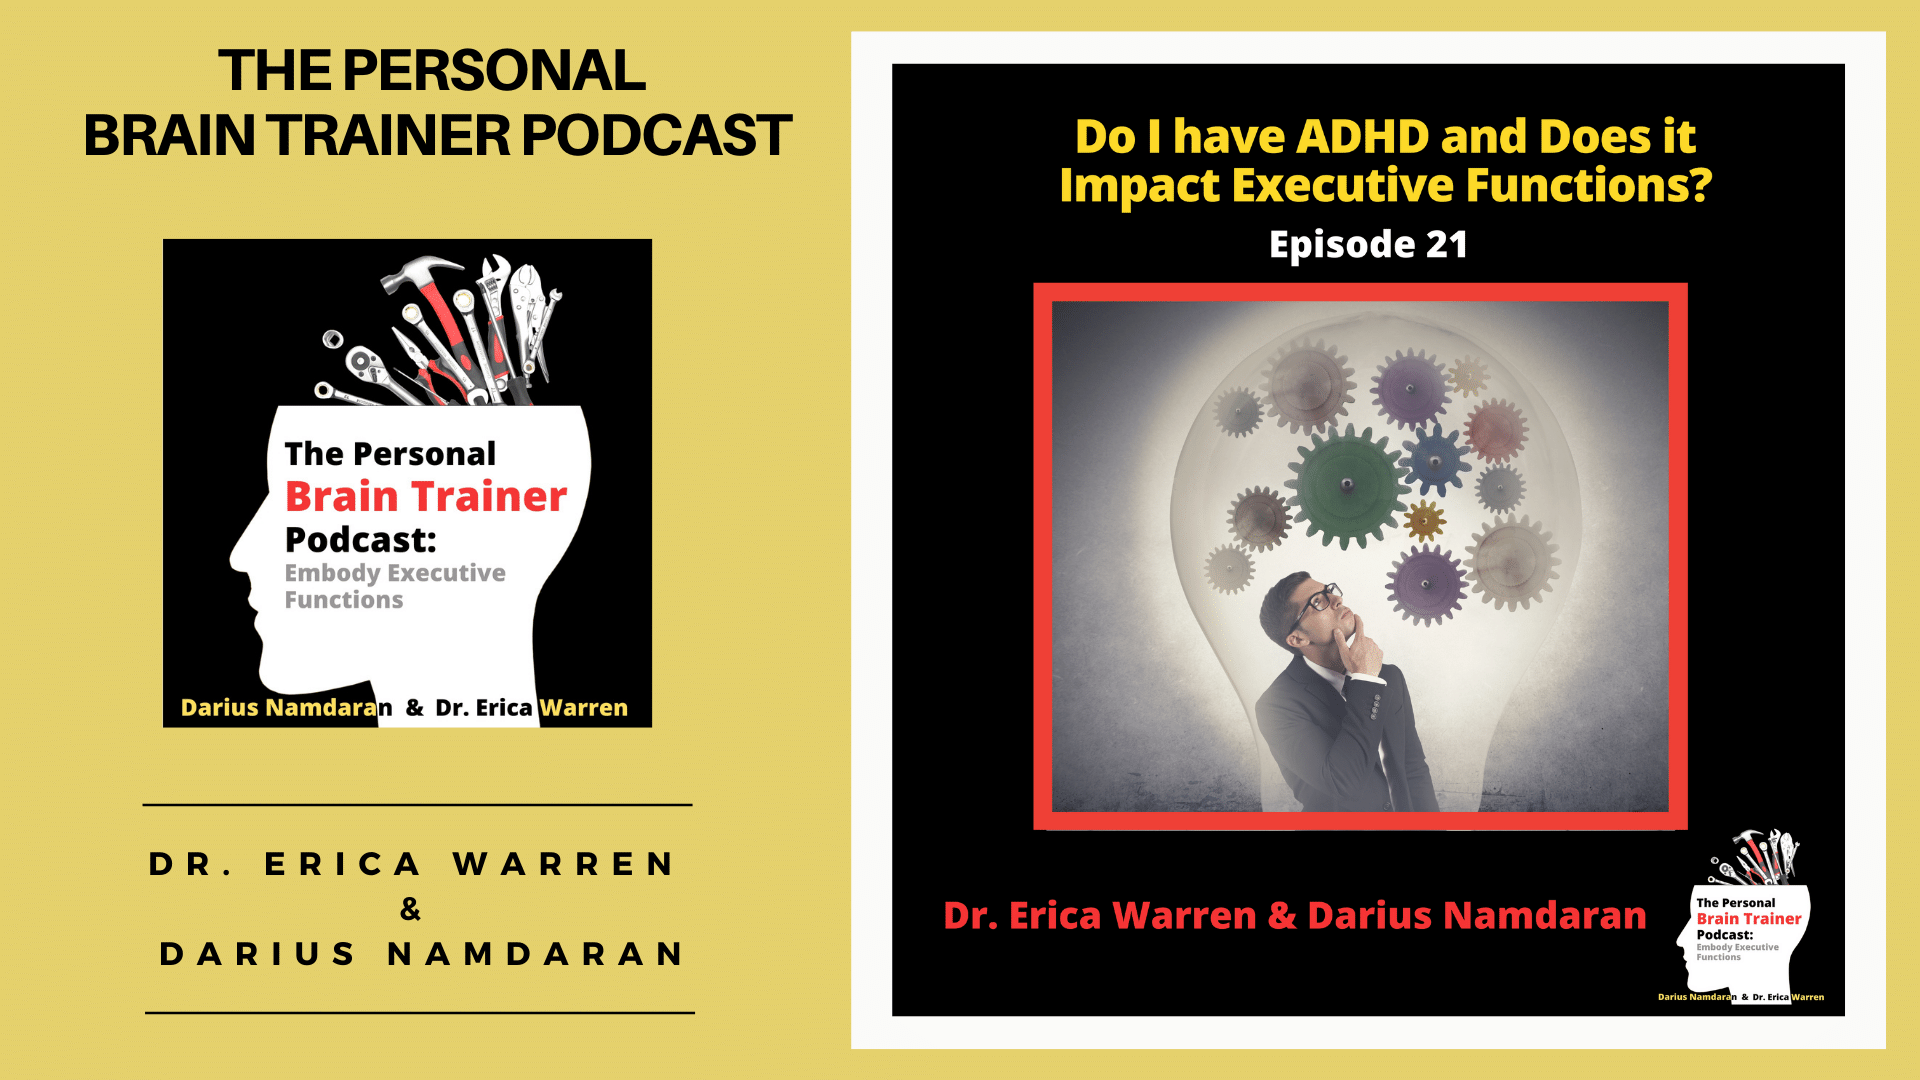 Episode 21 of the Personal Brain Trainer Podcast